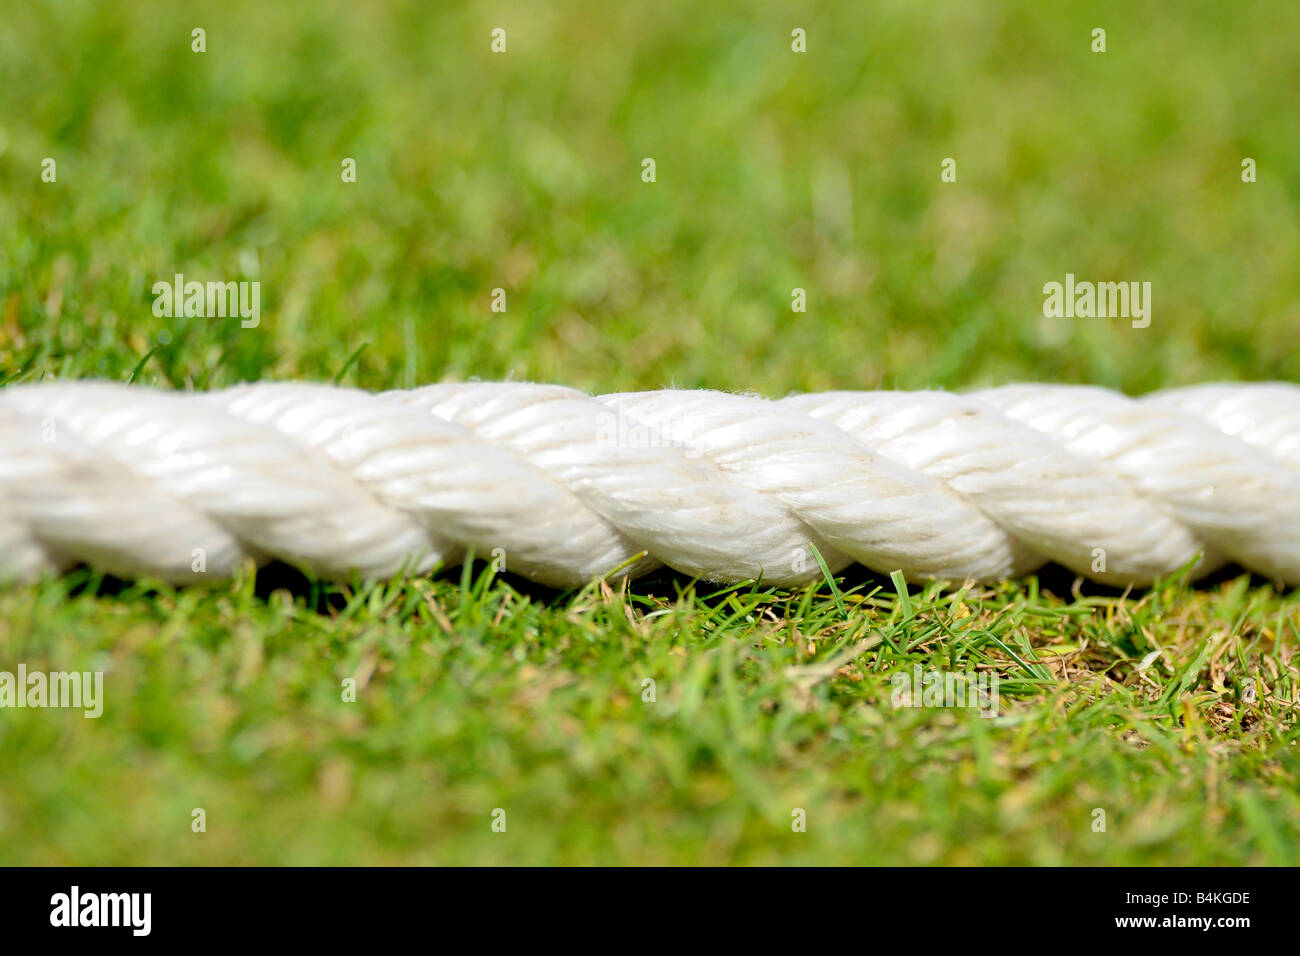 Detail of the boundry rope at a cricket ground Stock Photo - Alamy